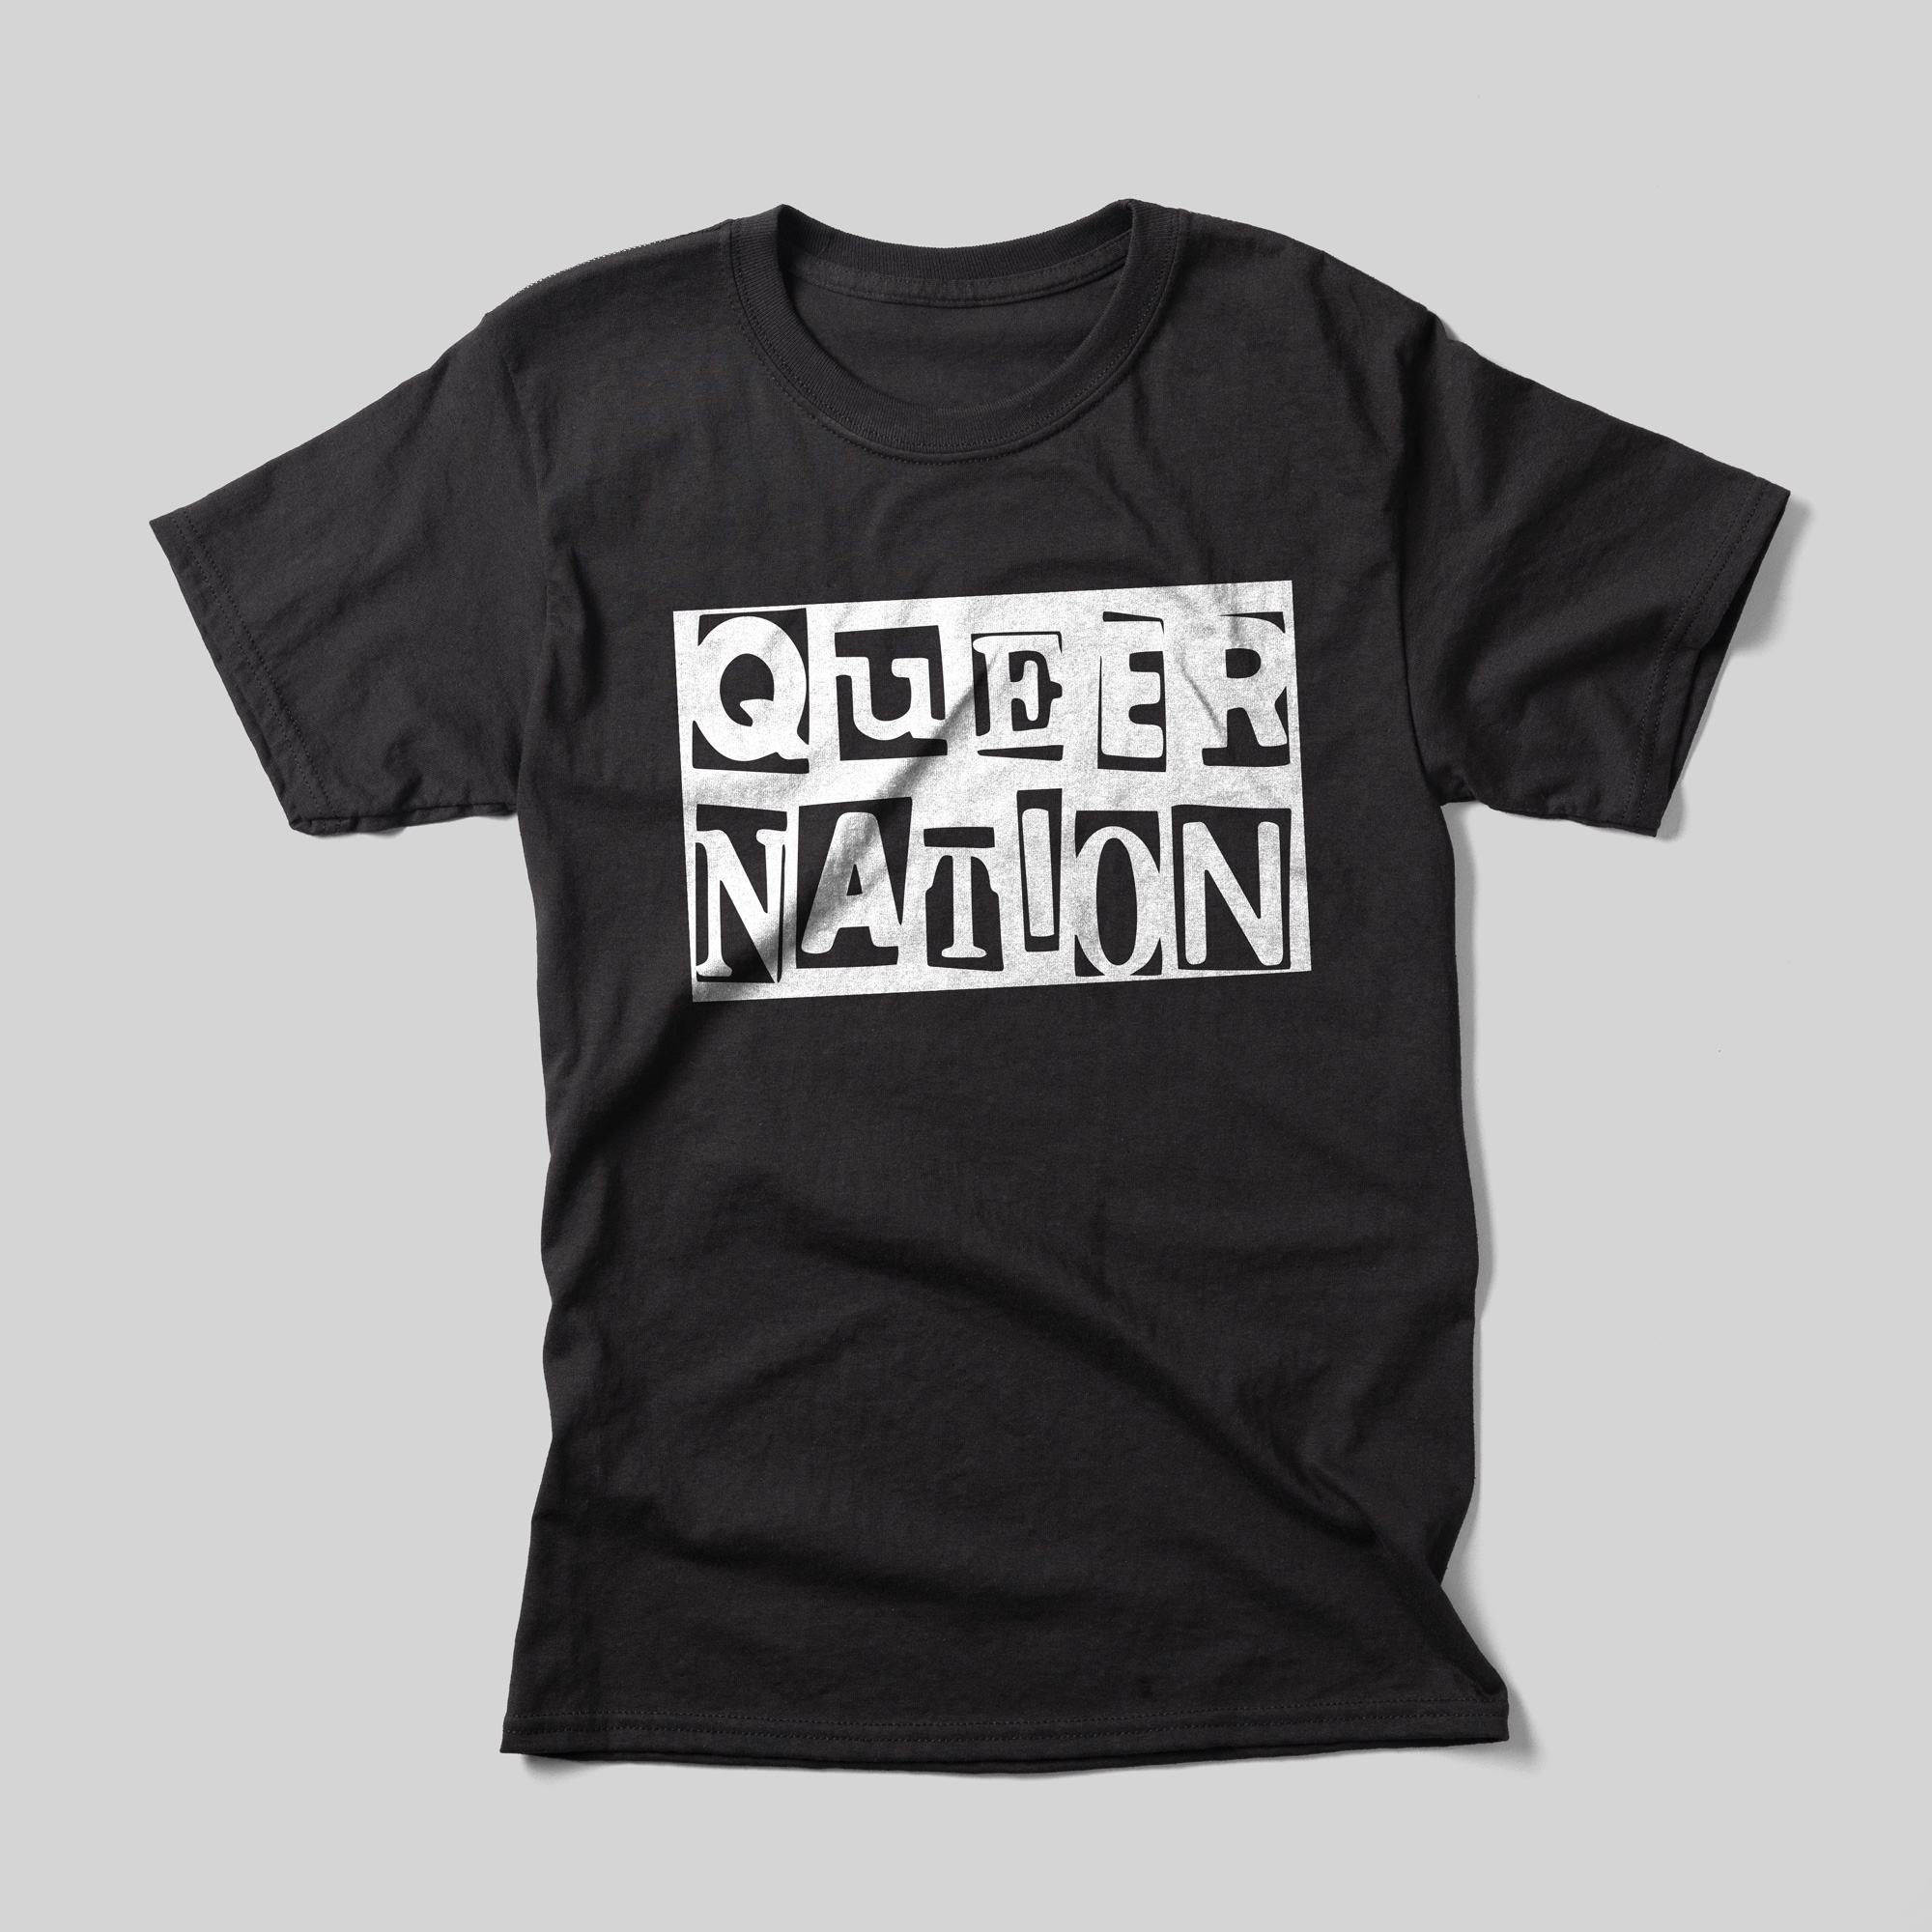 A black t-shirt with the logo for Queer Nation in white.